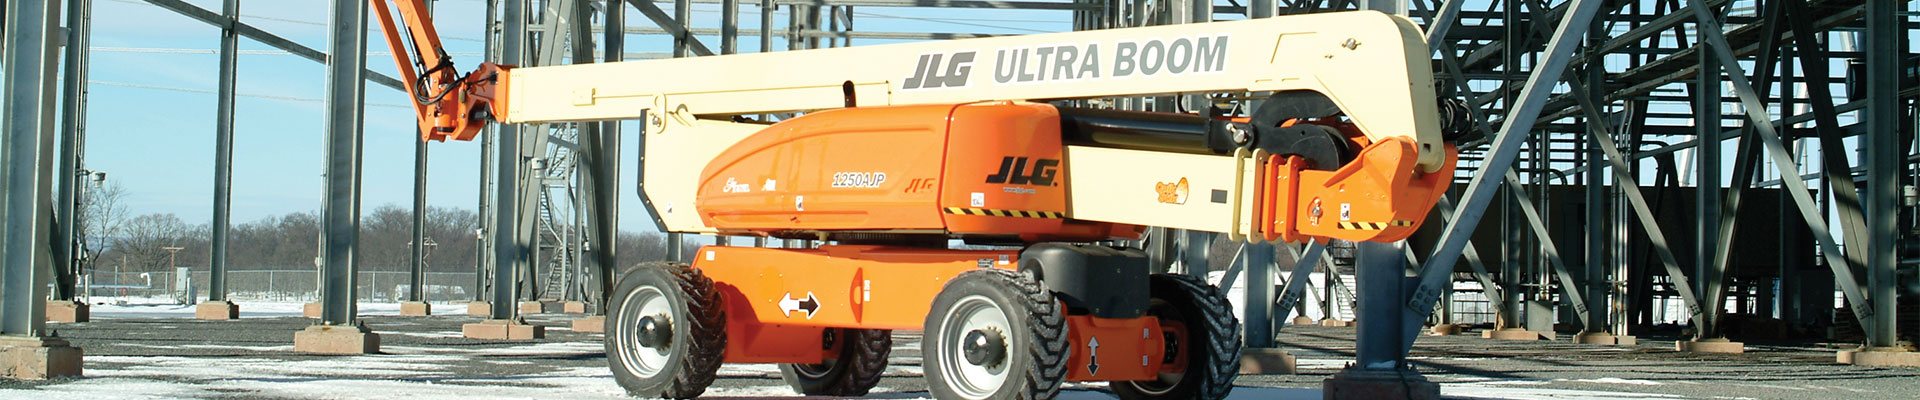 Parts for JLG boom lift working construction